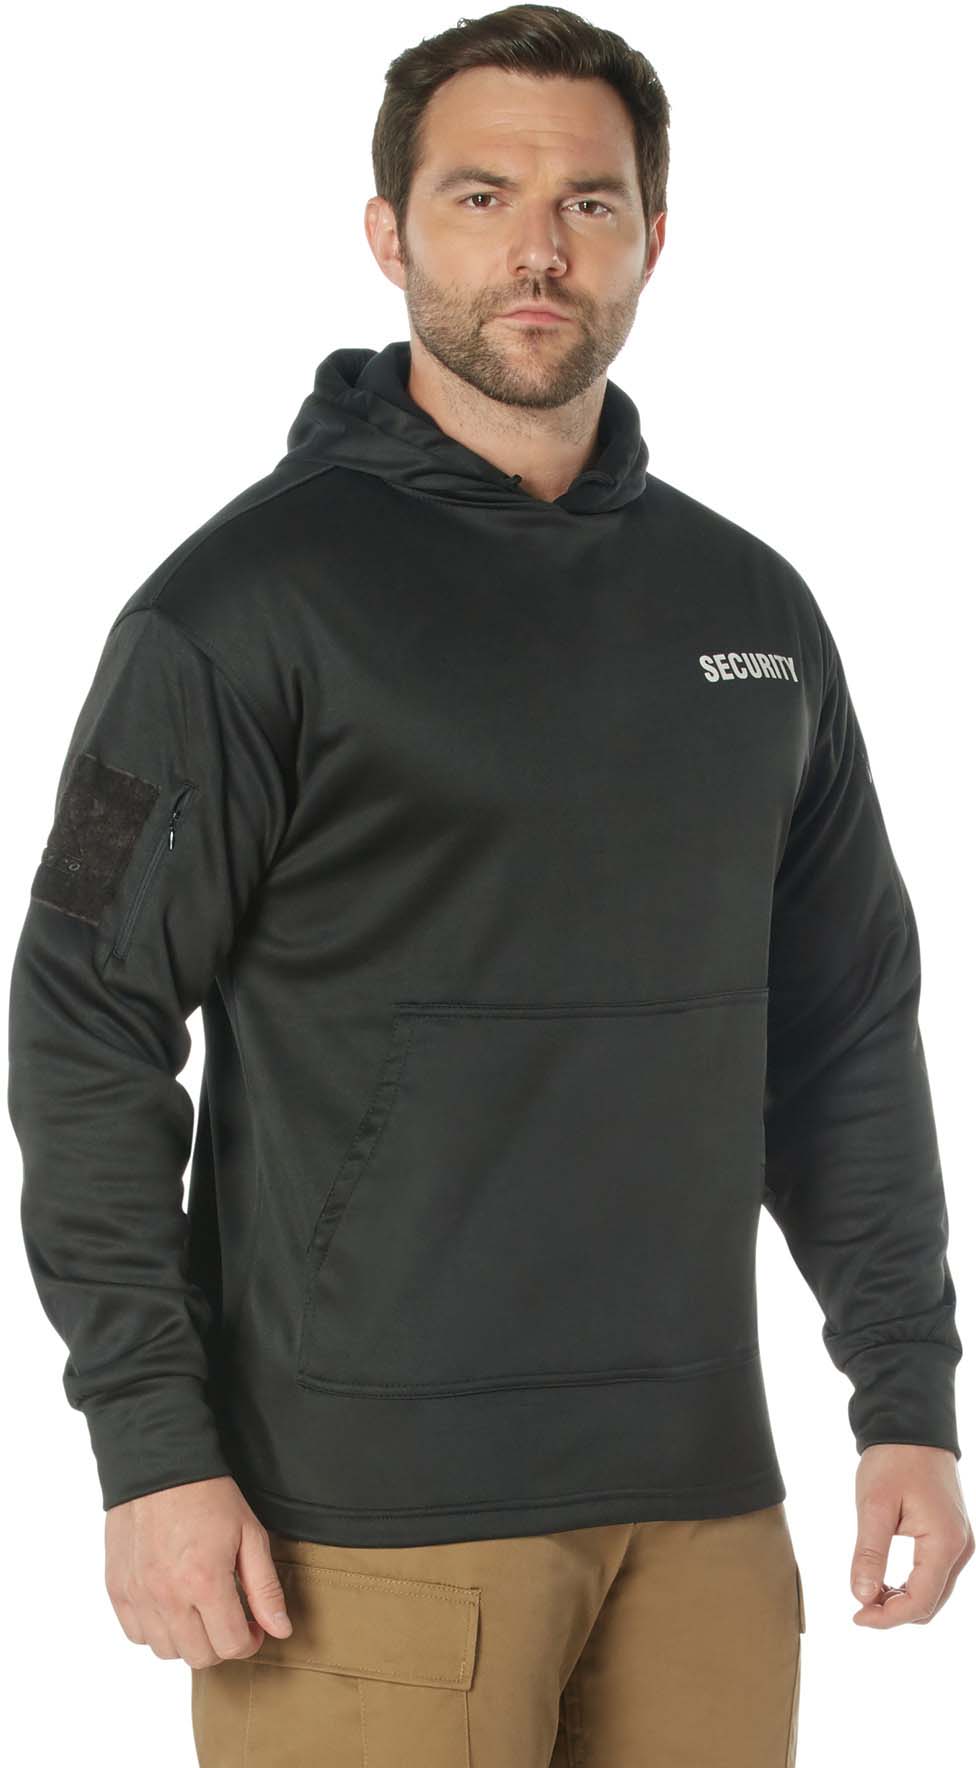 Rothco Security Concealed Carry Hoodie